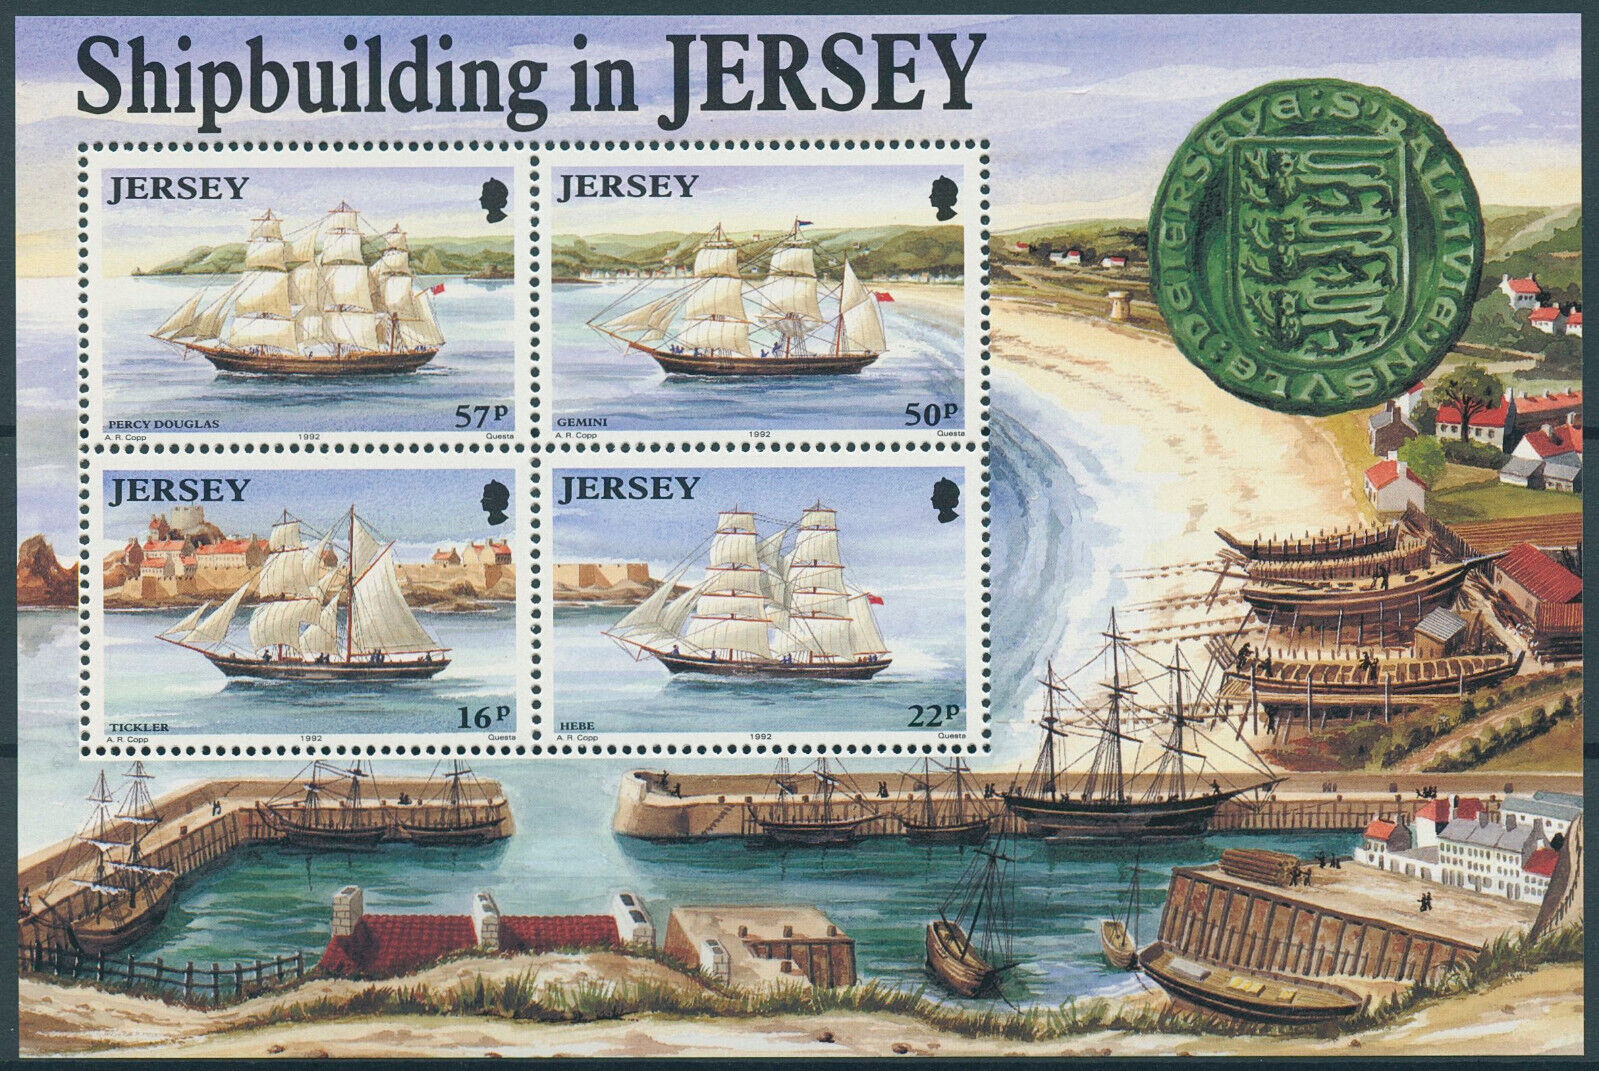 Jersey 1992 MNH Ships Stamps Shipbuilding in Jersey Nautical Tickler Hebe 4v M/S